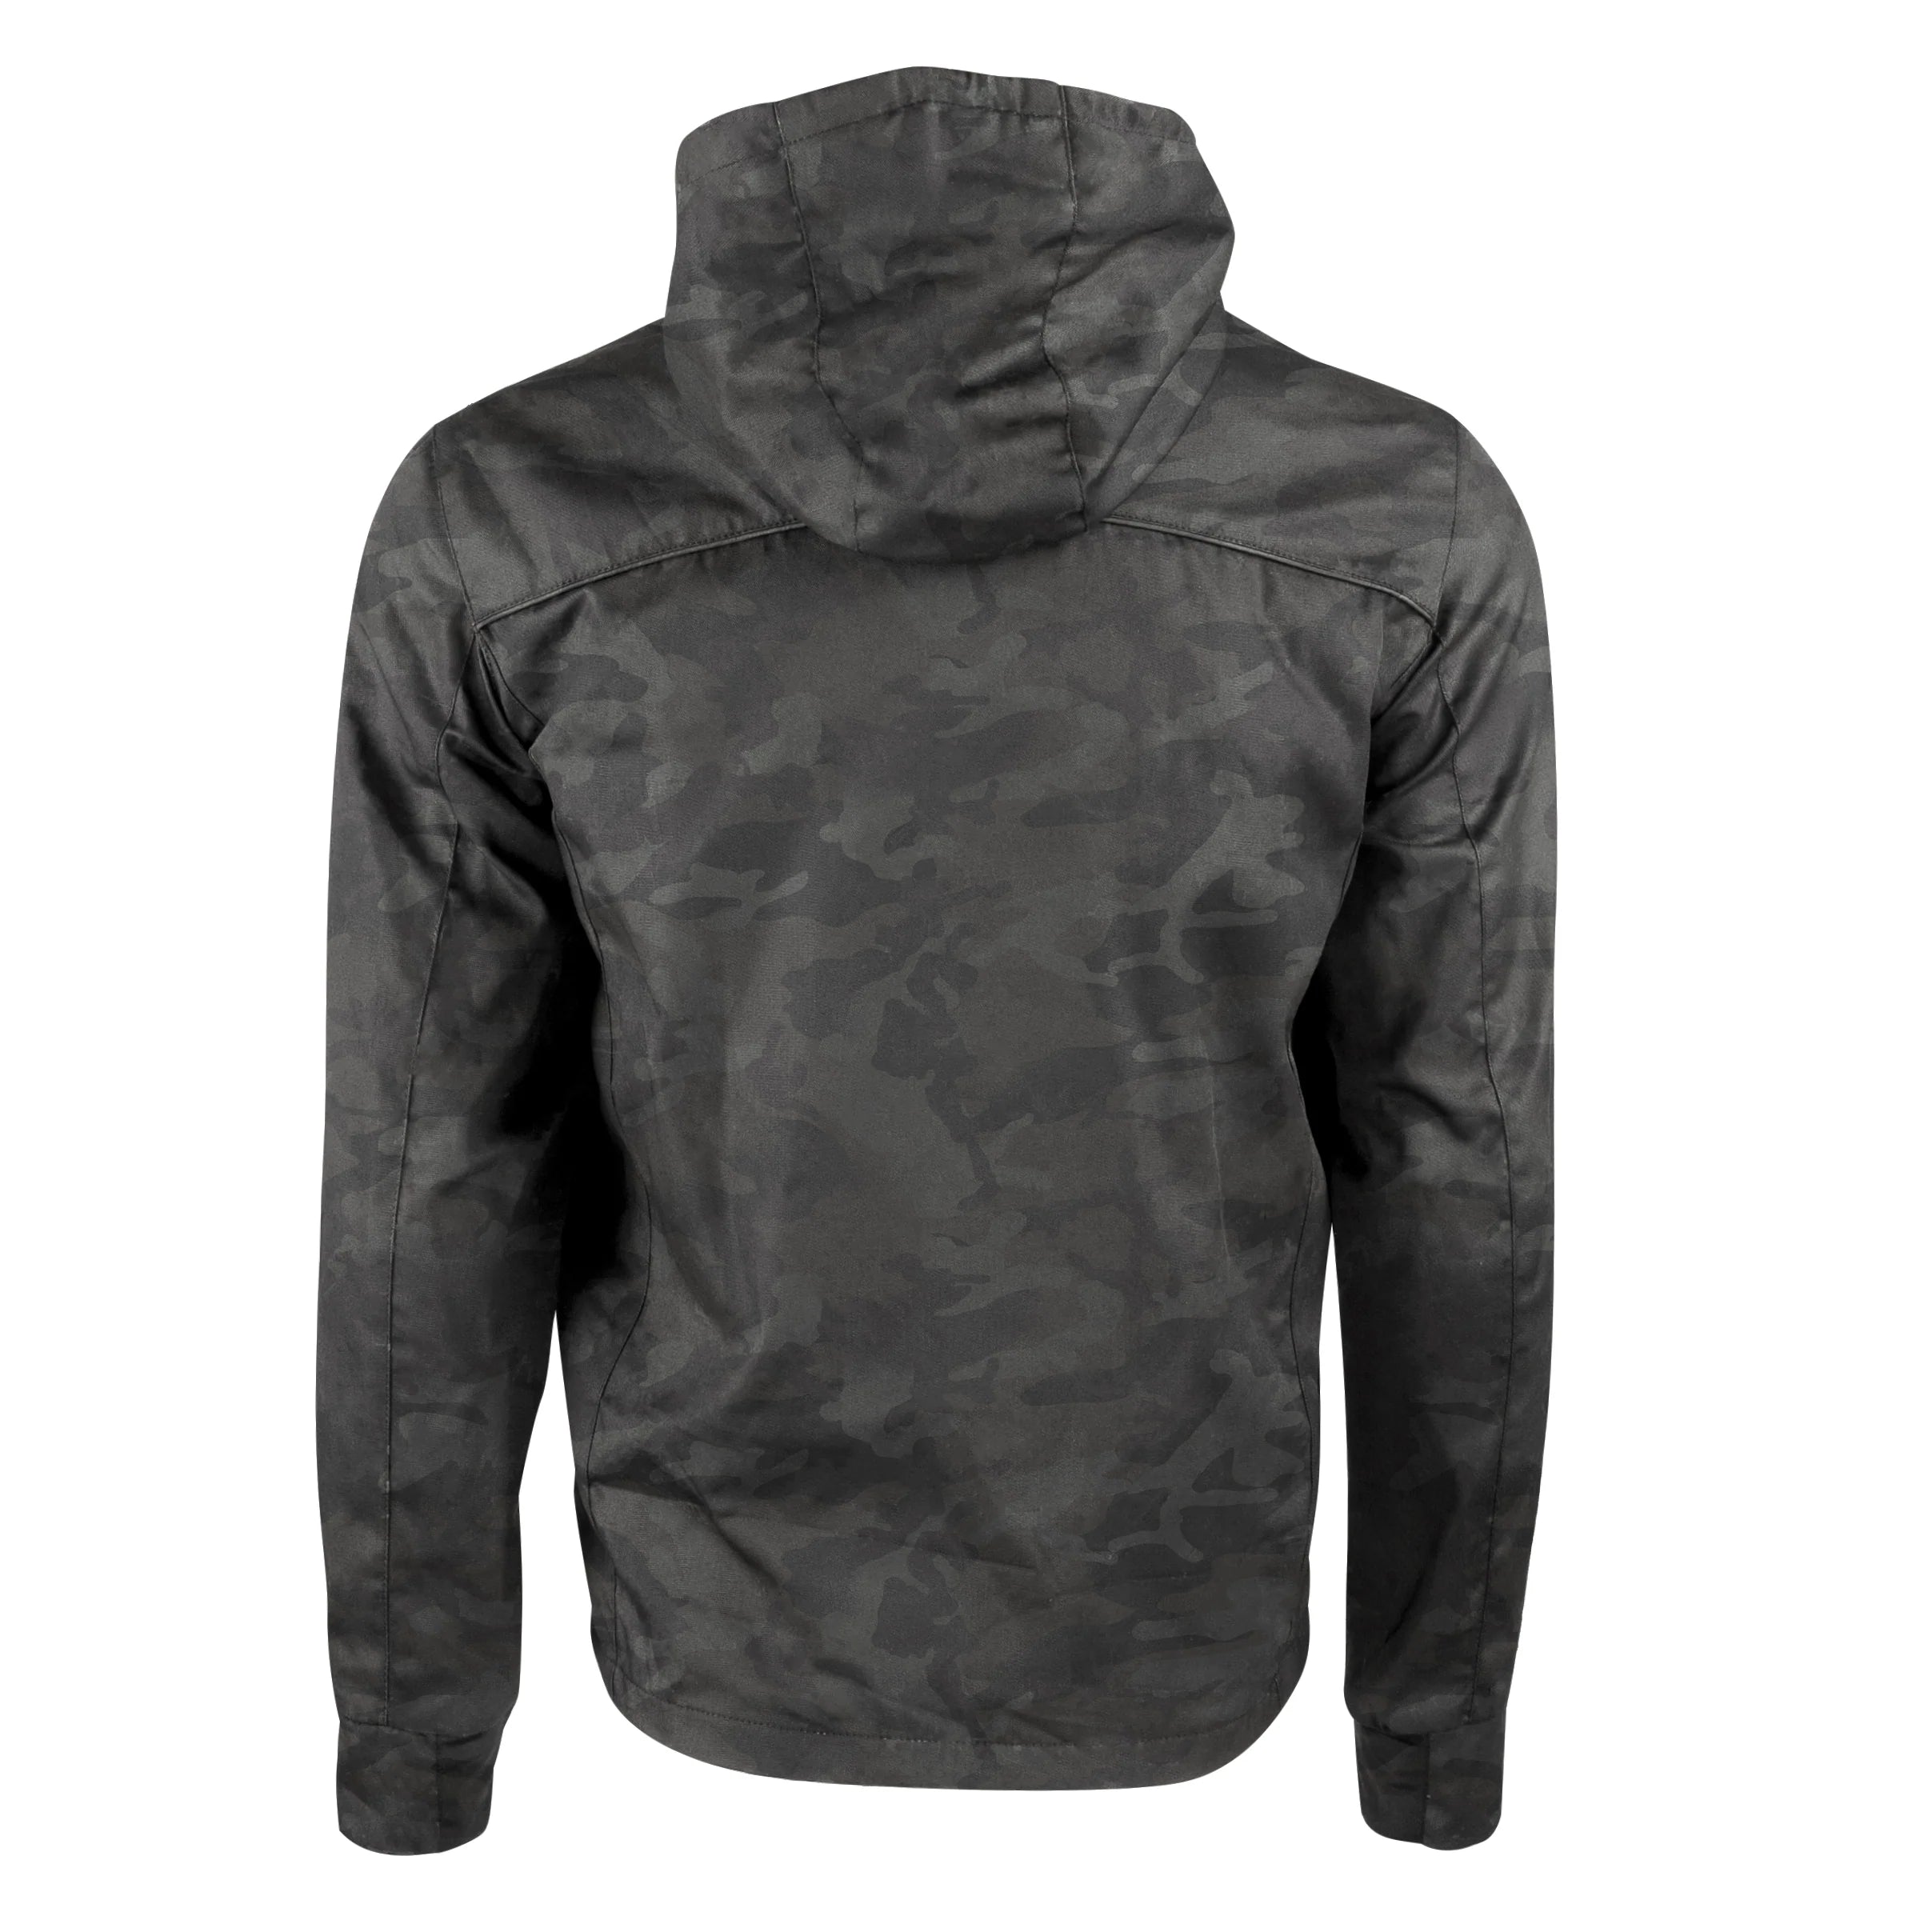 GO FOR BROKE ARMOURED HOODY (Camo) | Speed and Strength